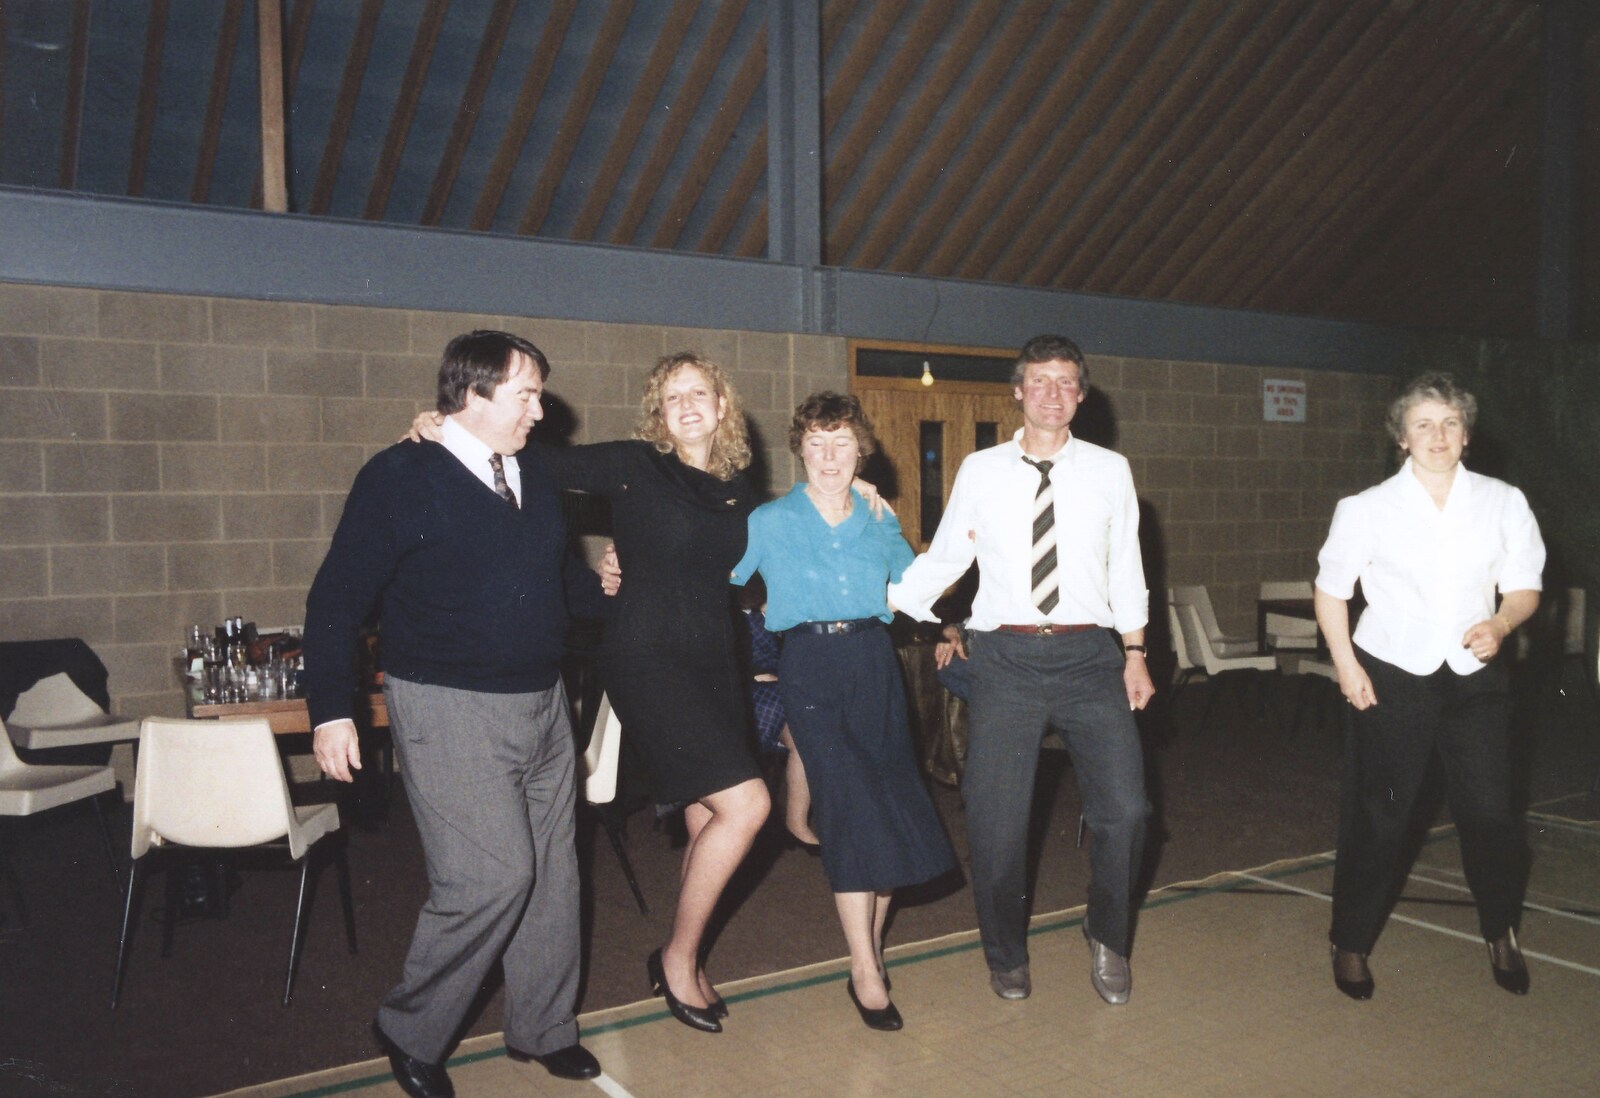 Random dancing in a sports hall from A Walk in Tyrrel's Wood, Pulham St. Mary, Norfolk - 23rd February 1991